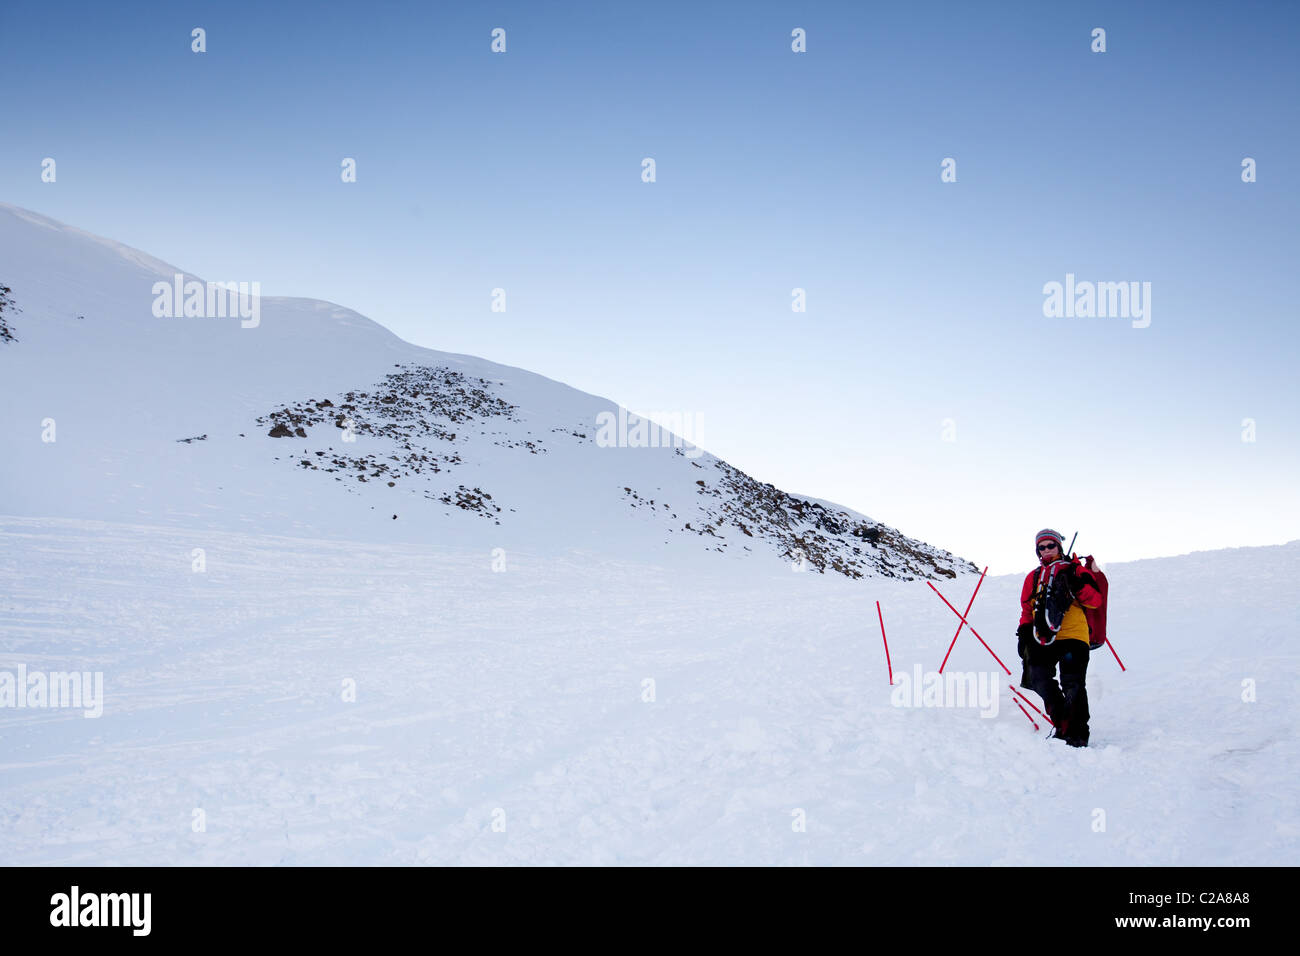 A female mountaineer on a snow filled slope, Svalbard, Norway Stock Photo